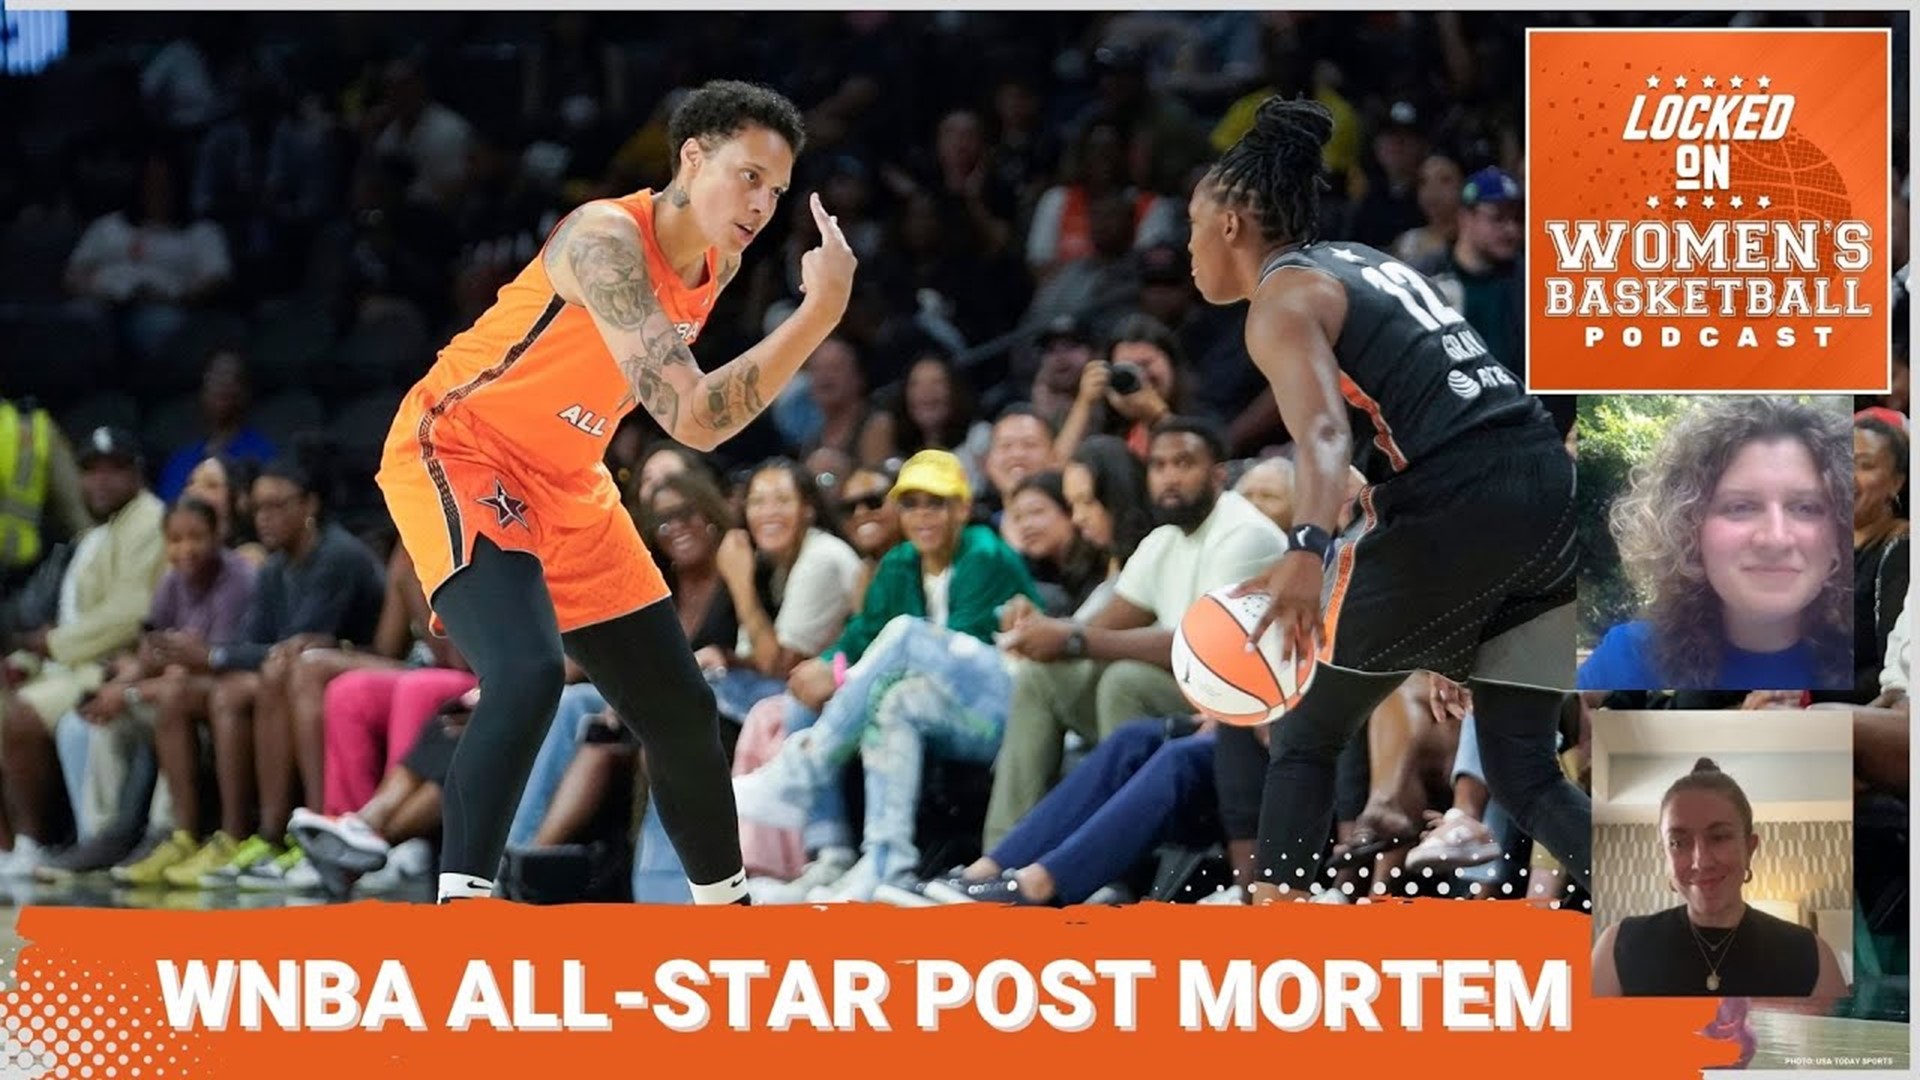 Host Jackie Powell is joined by Annie Costabile of the Chicago Sun Times to discuss what she made of 2023’s WNBA All-Star weekend in Las Vegas.